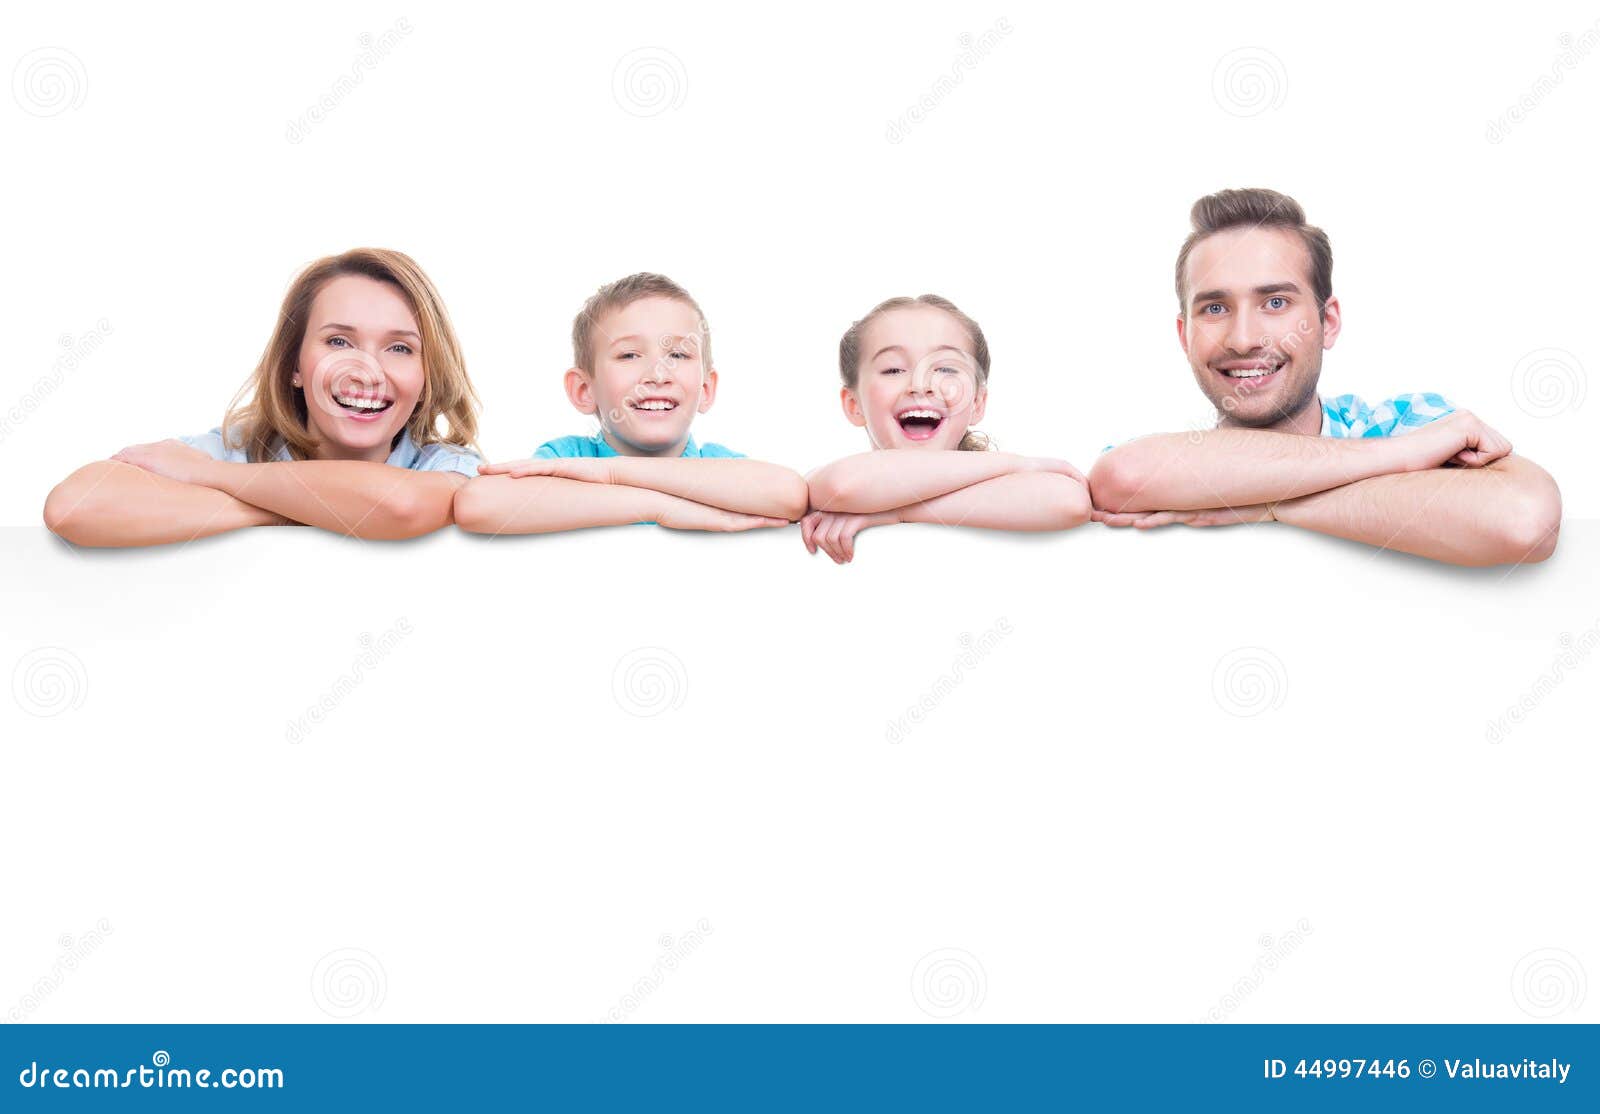 family-banner-young-isolated-white-background-44997446.jpg